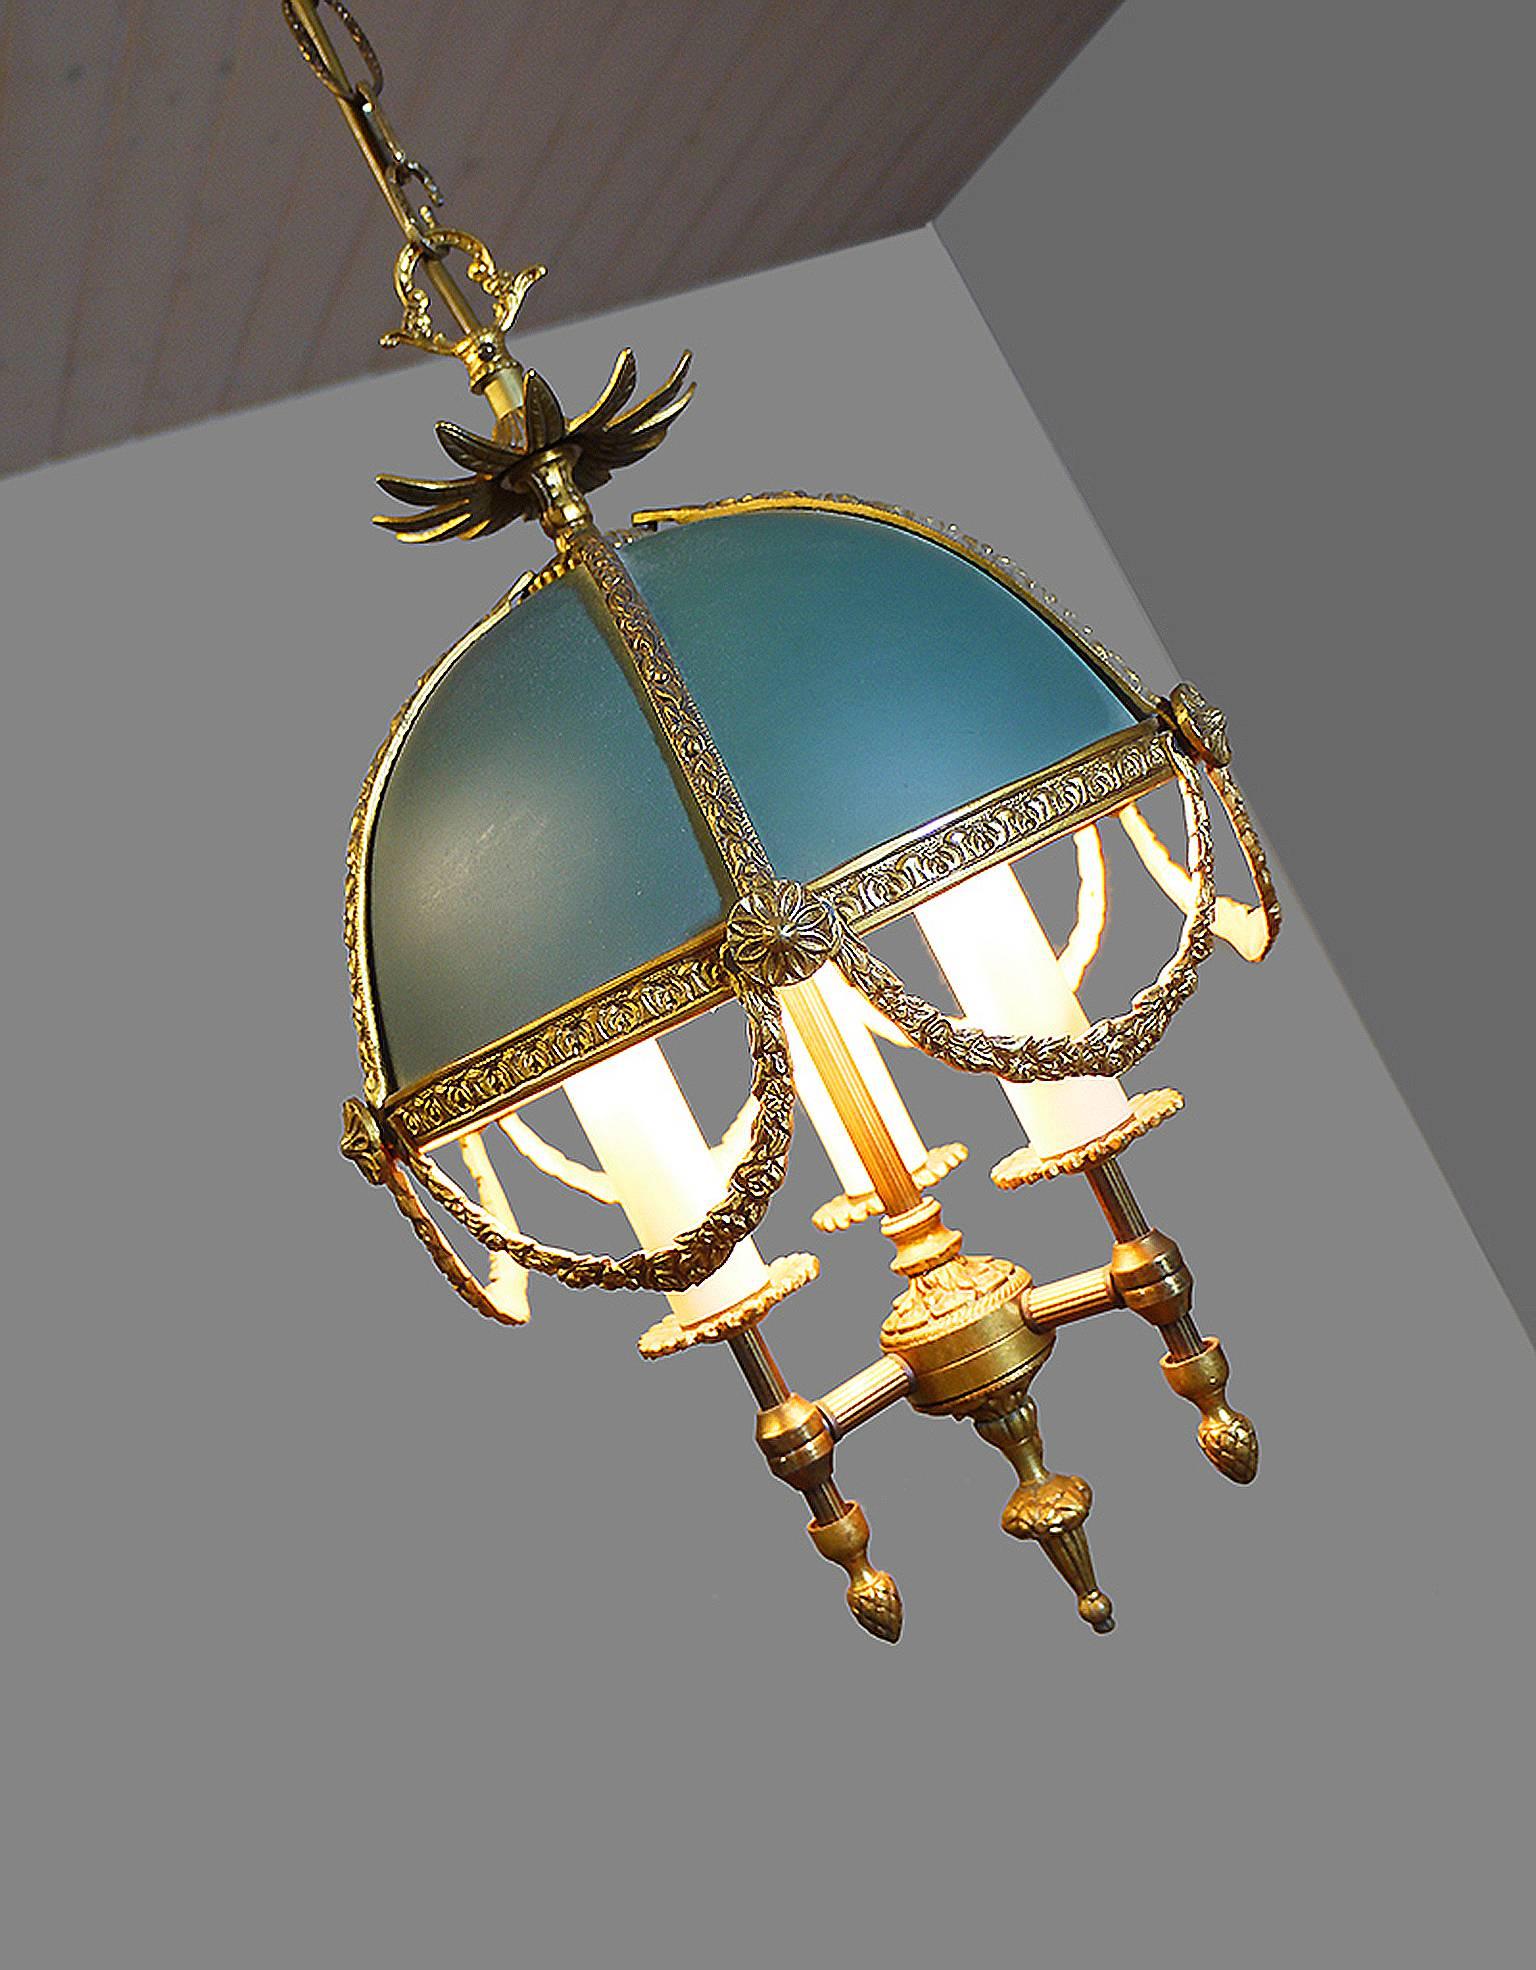 Elegant Louis XV style three lights chandelier in bronze with a painted tole shade.
Measures: Height with suspension 39